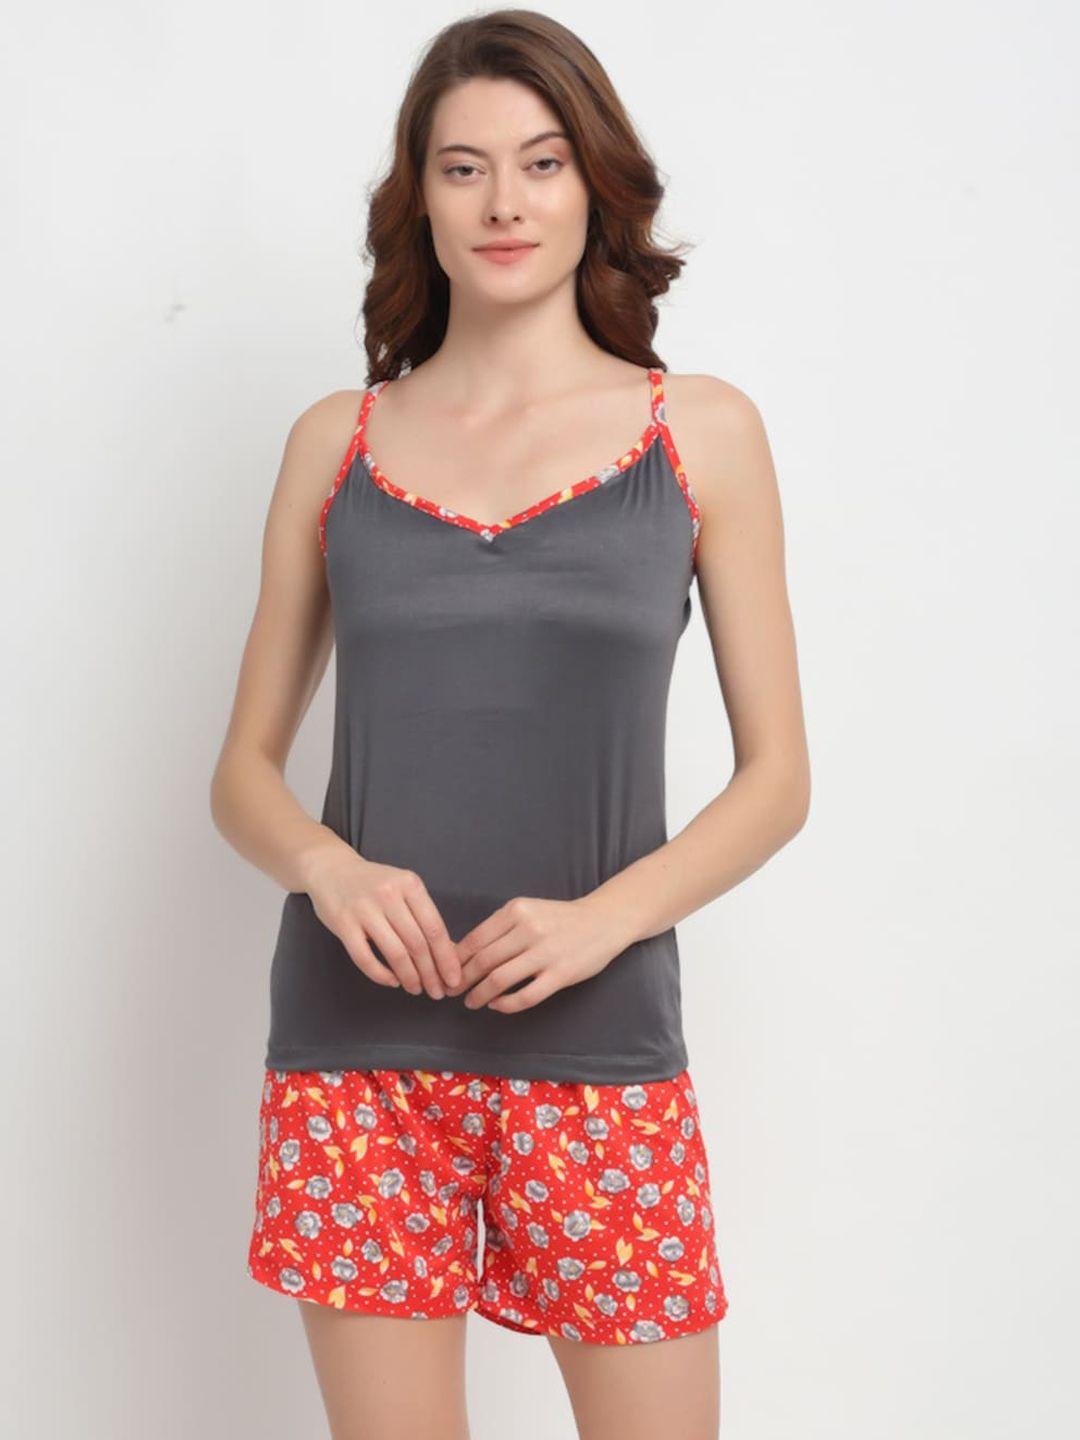 neudis women grey & red spaghetti top and shorts night suit n21wtst-8588gyrd_d